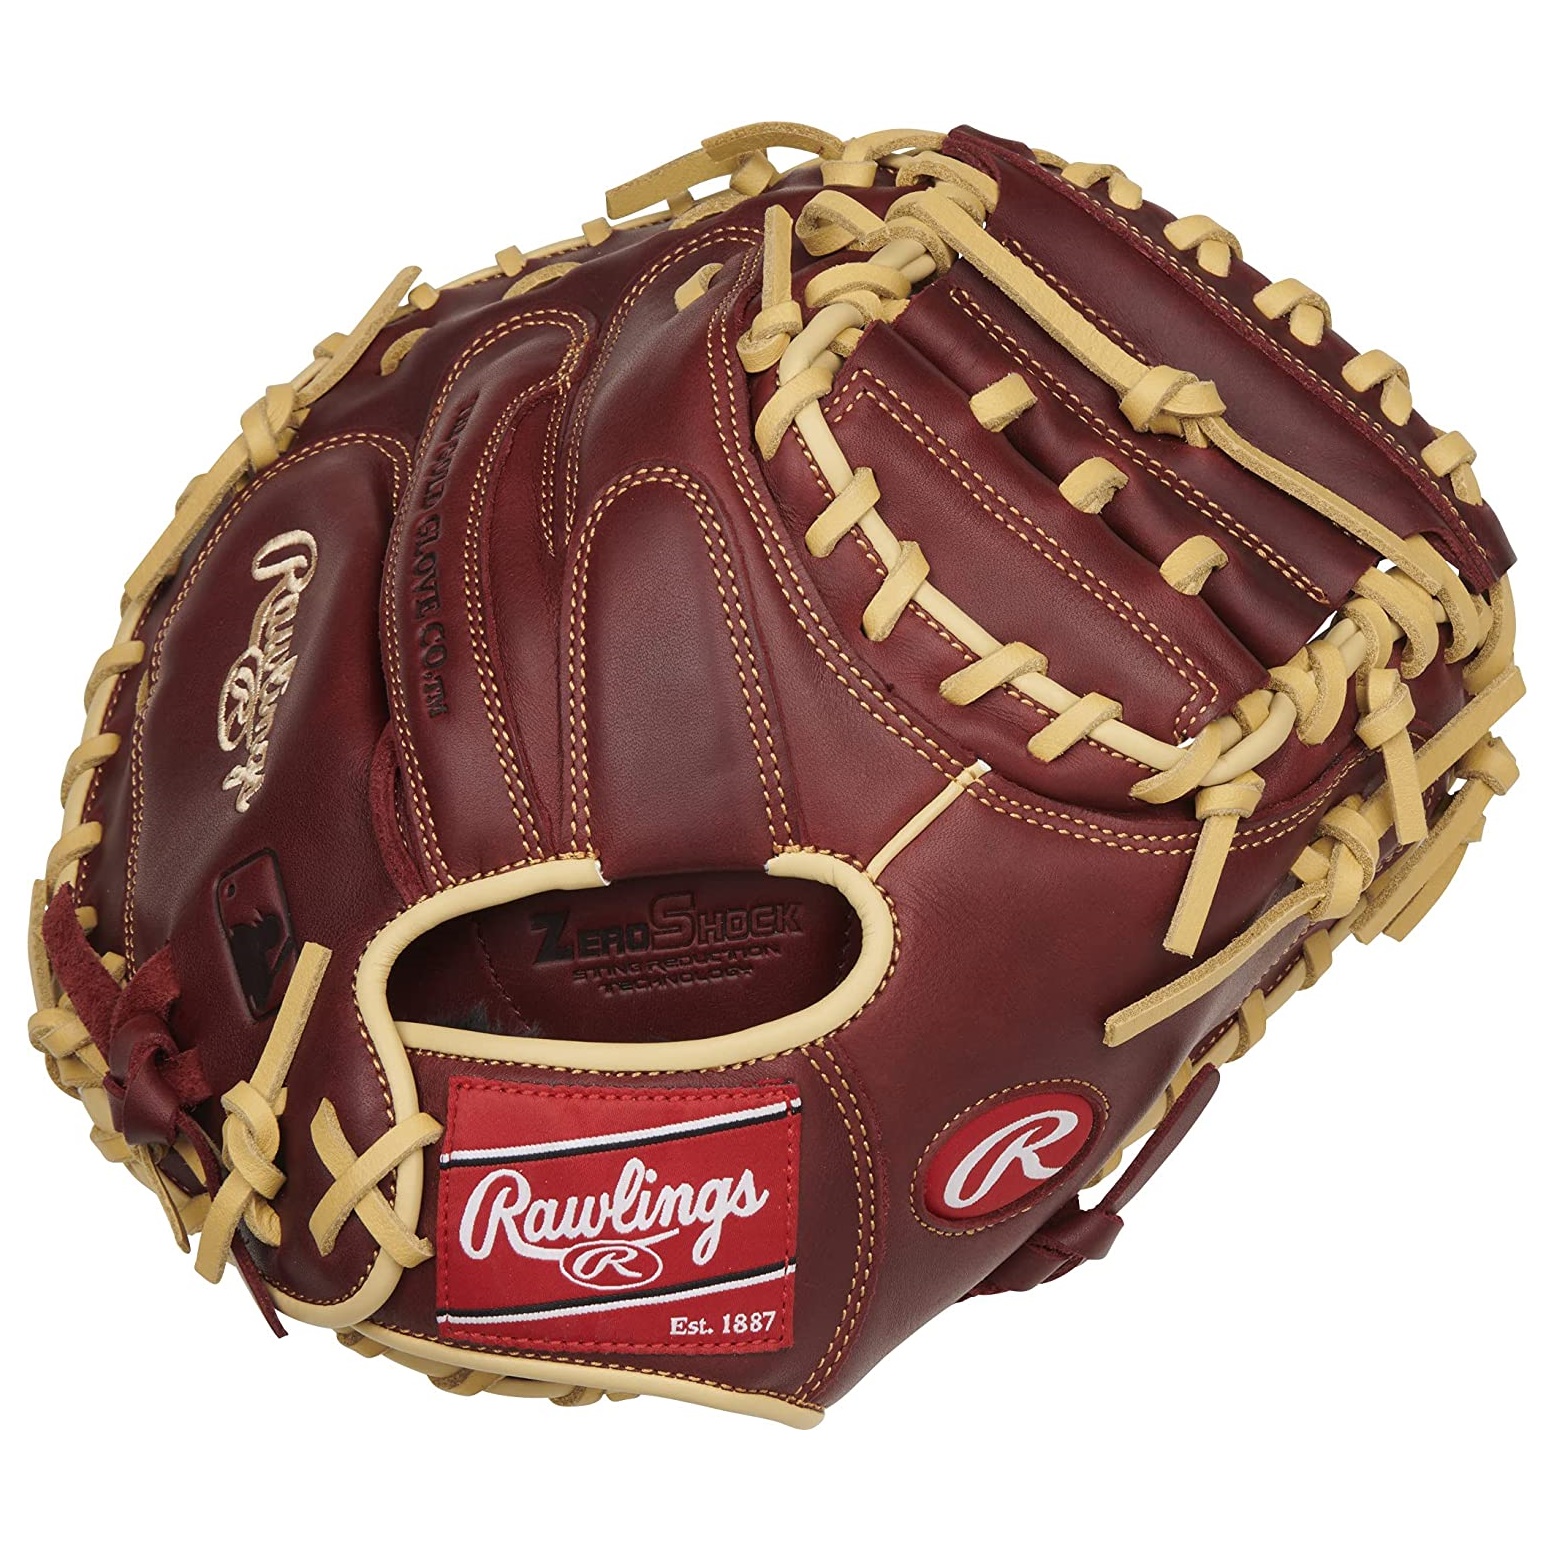    Back: Conventional     Fit: Standard     Lining: Padded Fingerback Liners     Padding: Zero Shock™ palm pads     Player Break-In: 20     Series: Sandlot     Shell: Full-grain oiled shell leather     Sport: Baseball     Throwing Hand: Right     Usage: Gloves     Web: 1-Piece Solid     Age Group: High School, 14U, 12U, 10U   The Sandlot Series gloves feature an oiled pull-up leather that gives the models a unique vintage look and feel with minimal break-in required. The designs are further enhanced with pro-style patterns. The Sandlot Series baseball gloves have a full-grain oiled shell leather for a unique vintage look and feel, minimal break-in time of 20 percent, a standard fit, padded fingerback liners, Zero Shock™ palm pads, a 1-piece solid web, and is suitable for right-handed players of high school, 14U, 12U, and 10U age groups.   